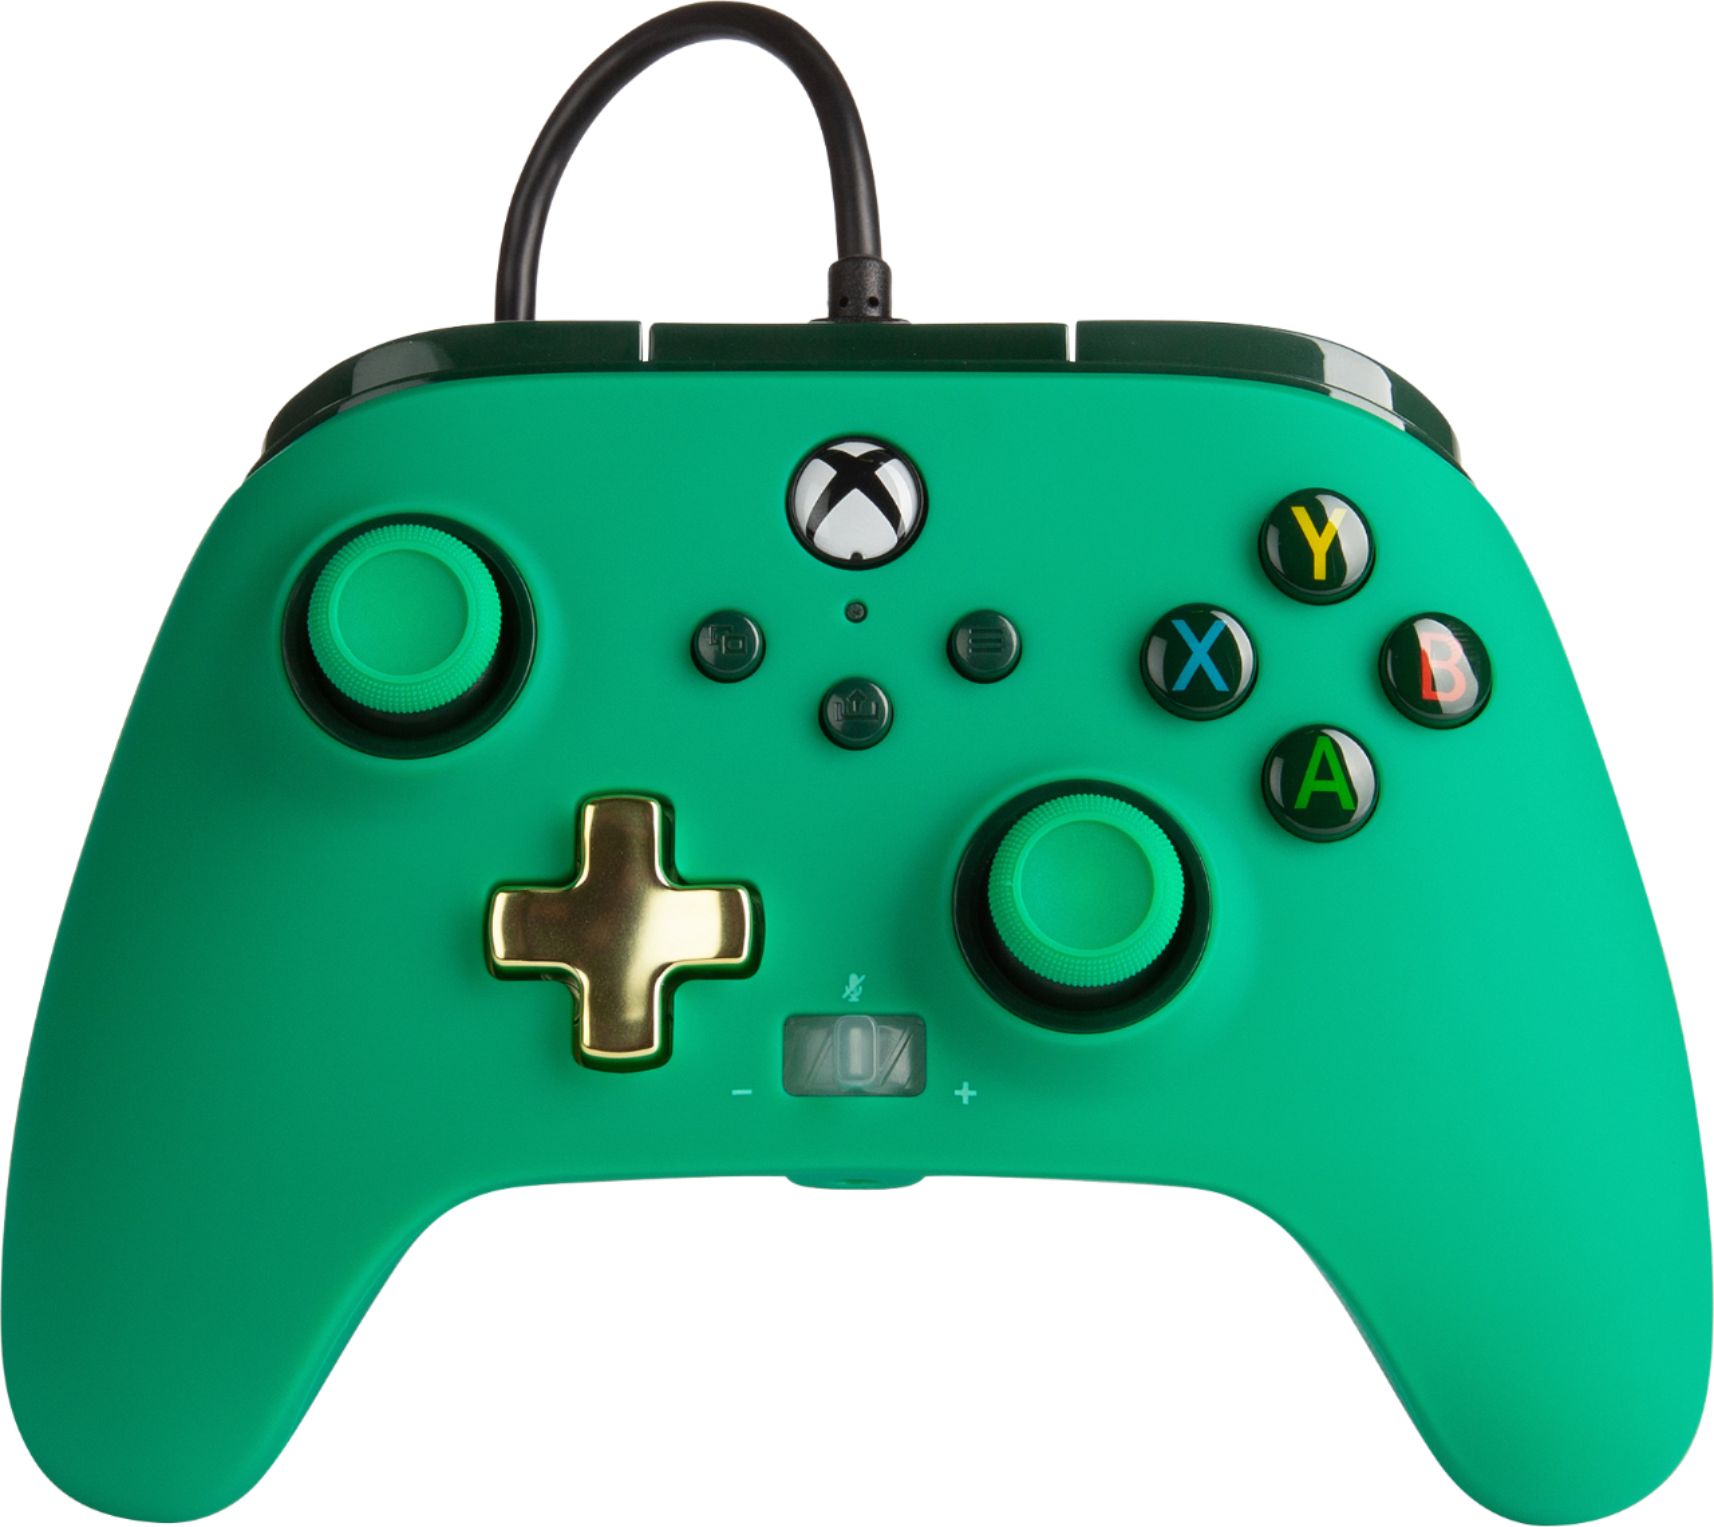 Enhanced Wired Controller for Xbox Series X, S - Mist